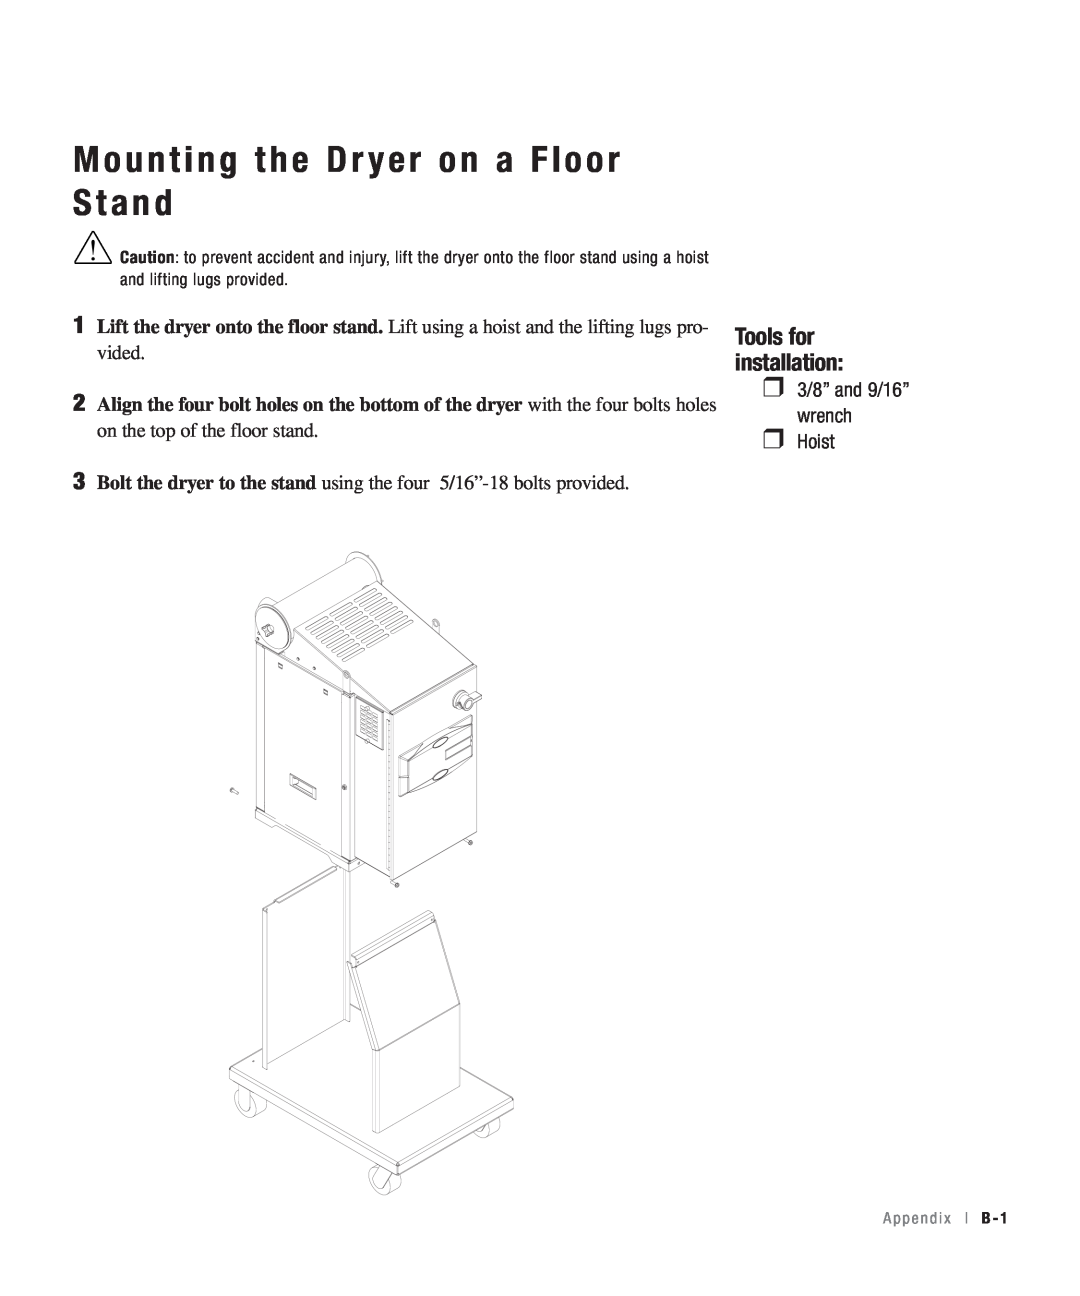 Conair 15, 25, 50, 100 specifications Mounting the Dr yer on a Floor Stand, Tools for installation 